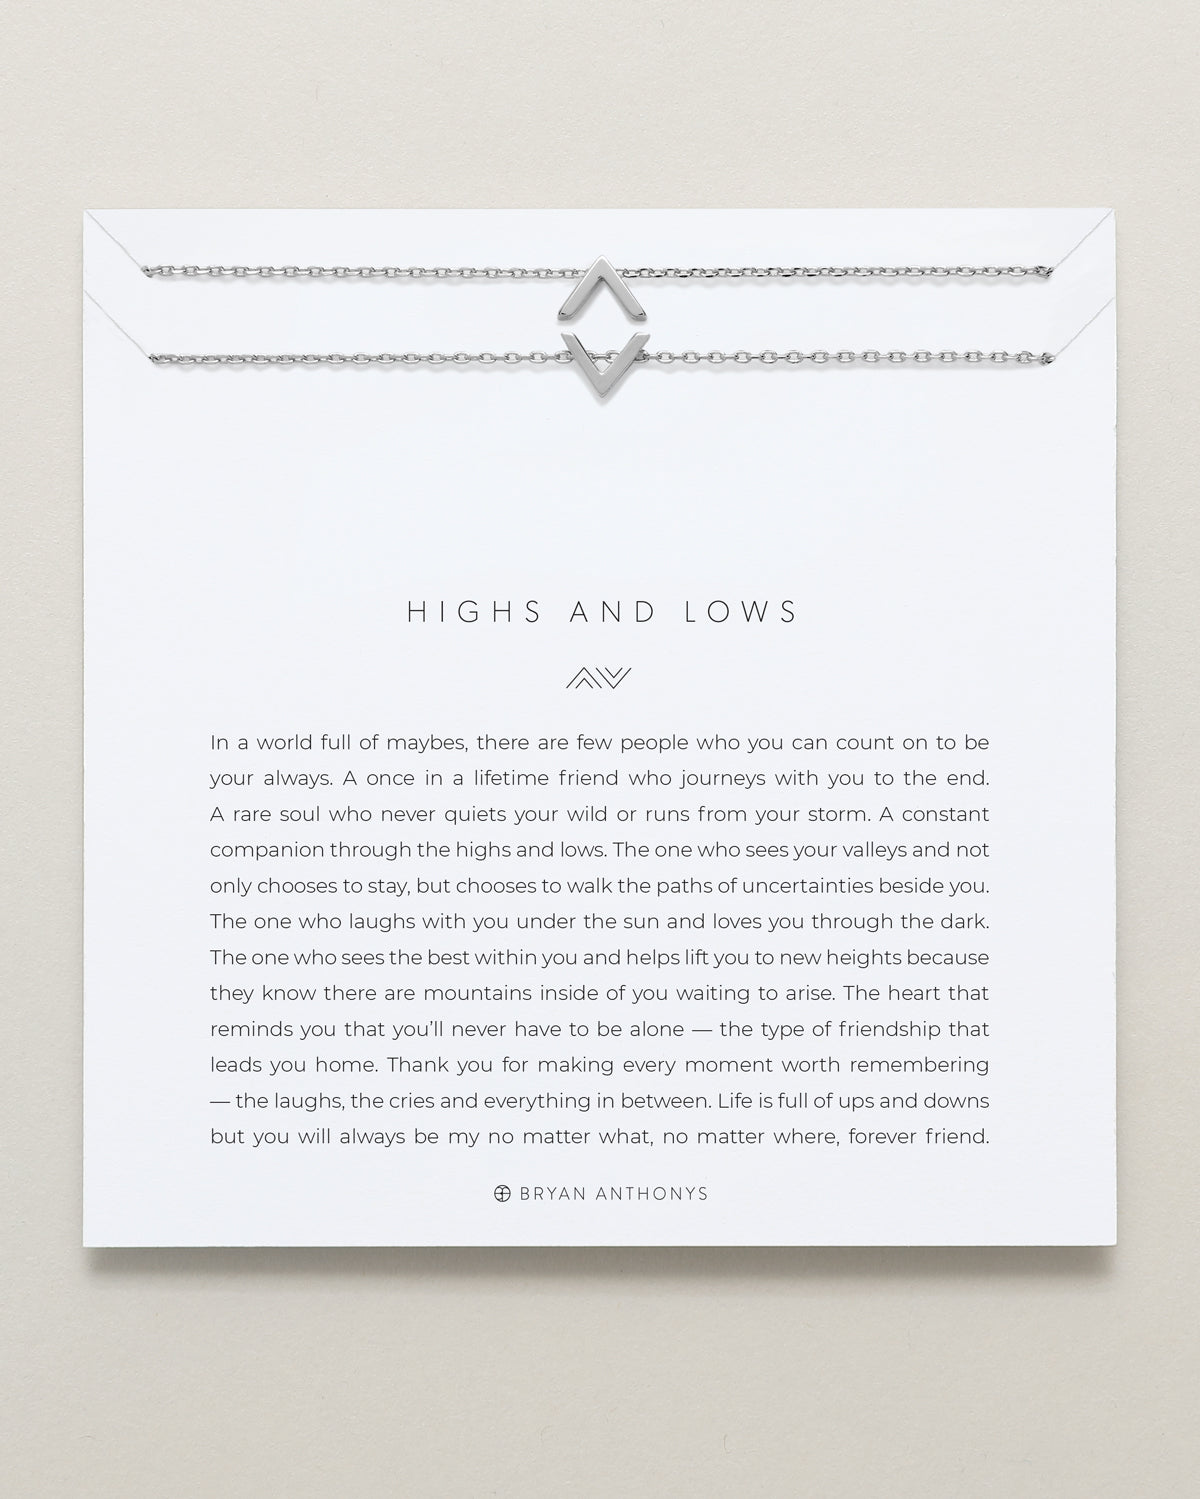  Bryan Anthonys Highs And Lows Silver Chain Bracelet Set On Card